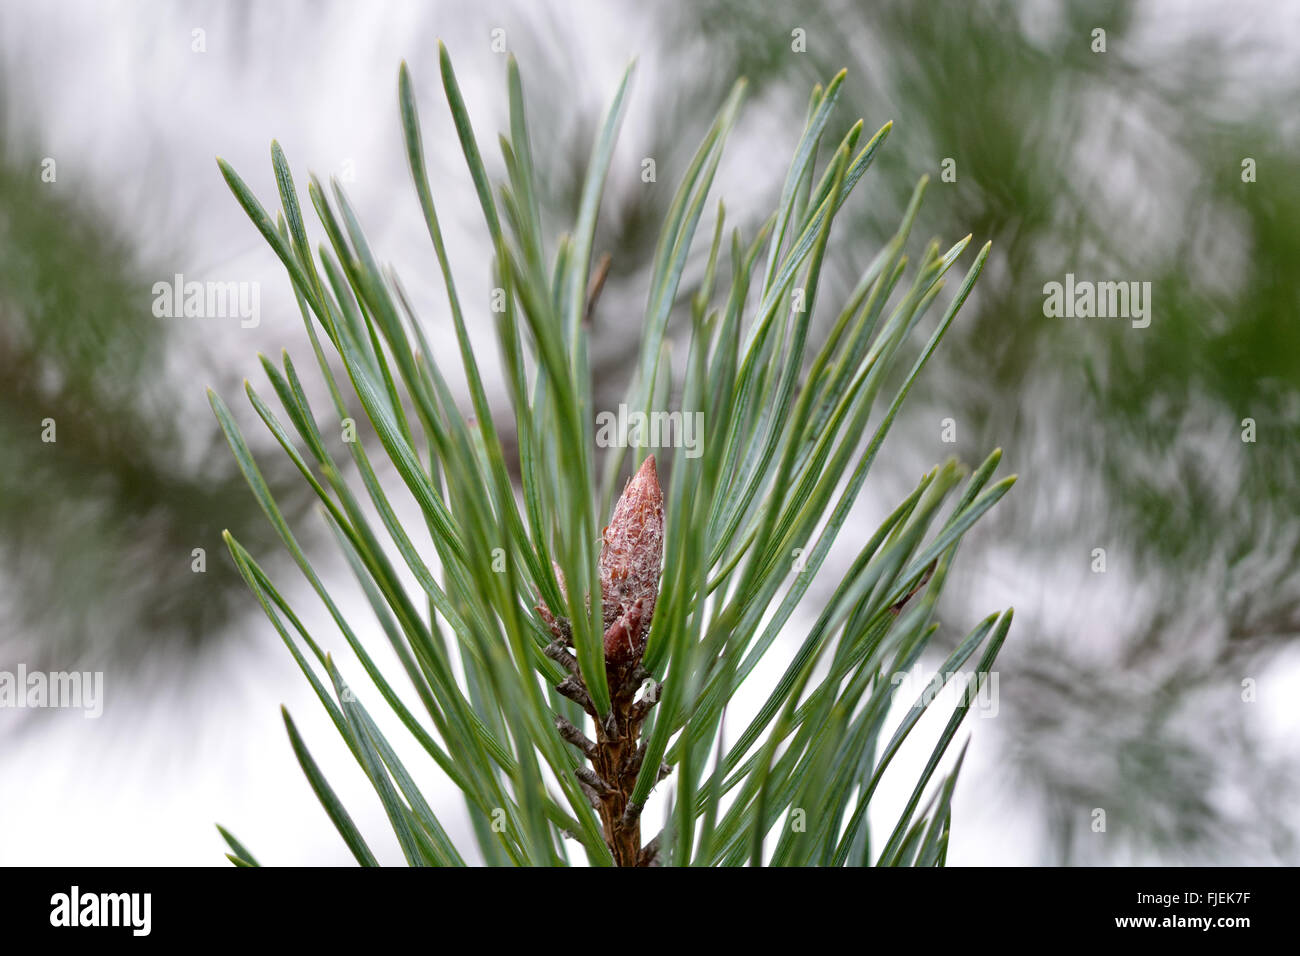 Scots pine (Pinus sylvestris) bud and needles. Close up of bud with leaves on conifer tree in family Pinaceae Stock Photo